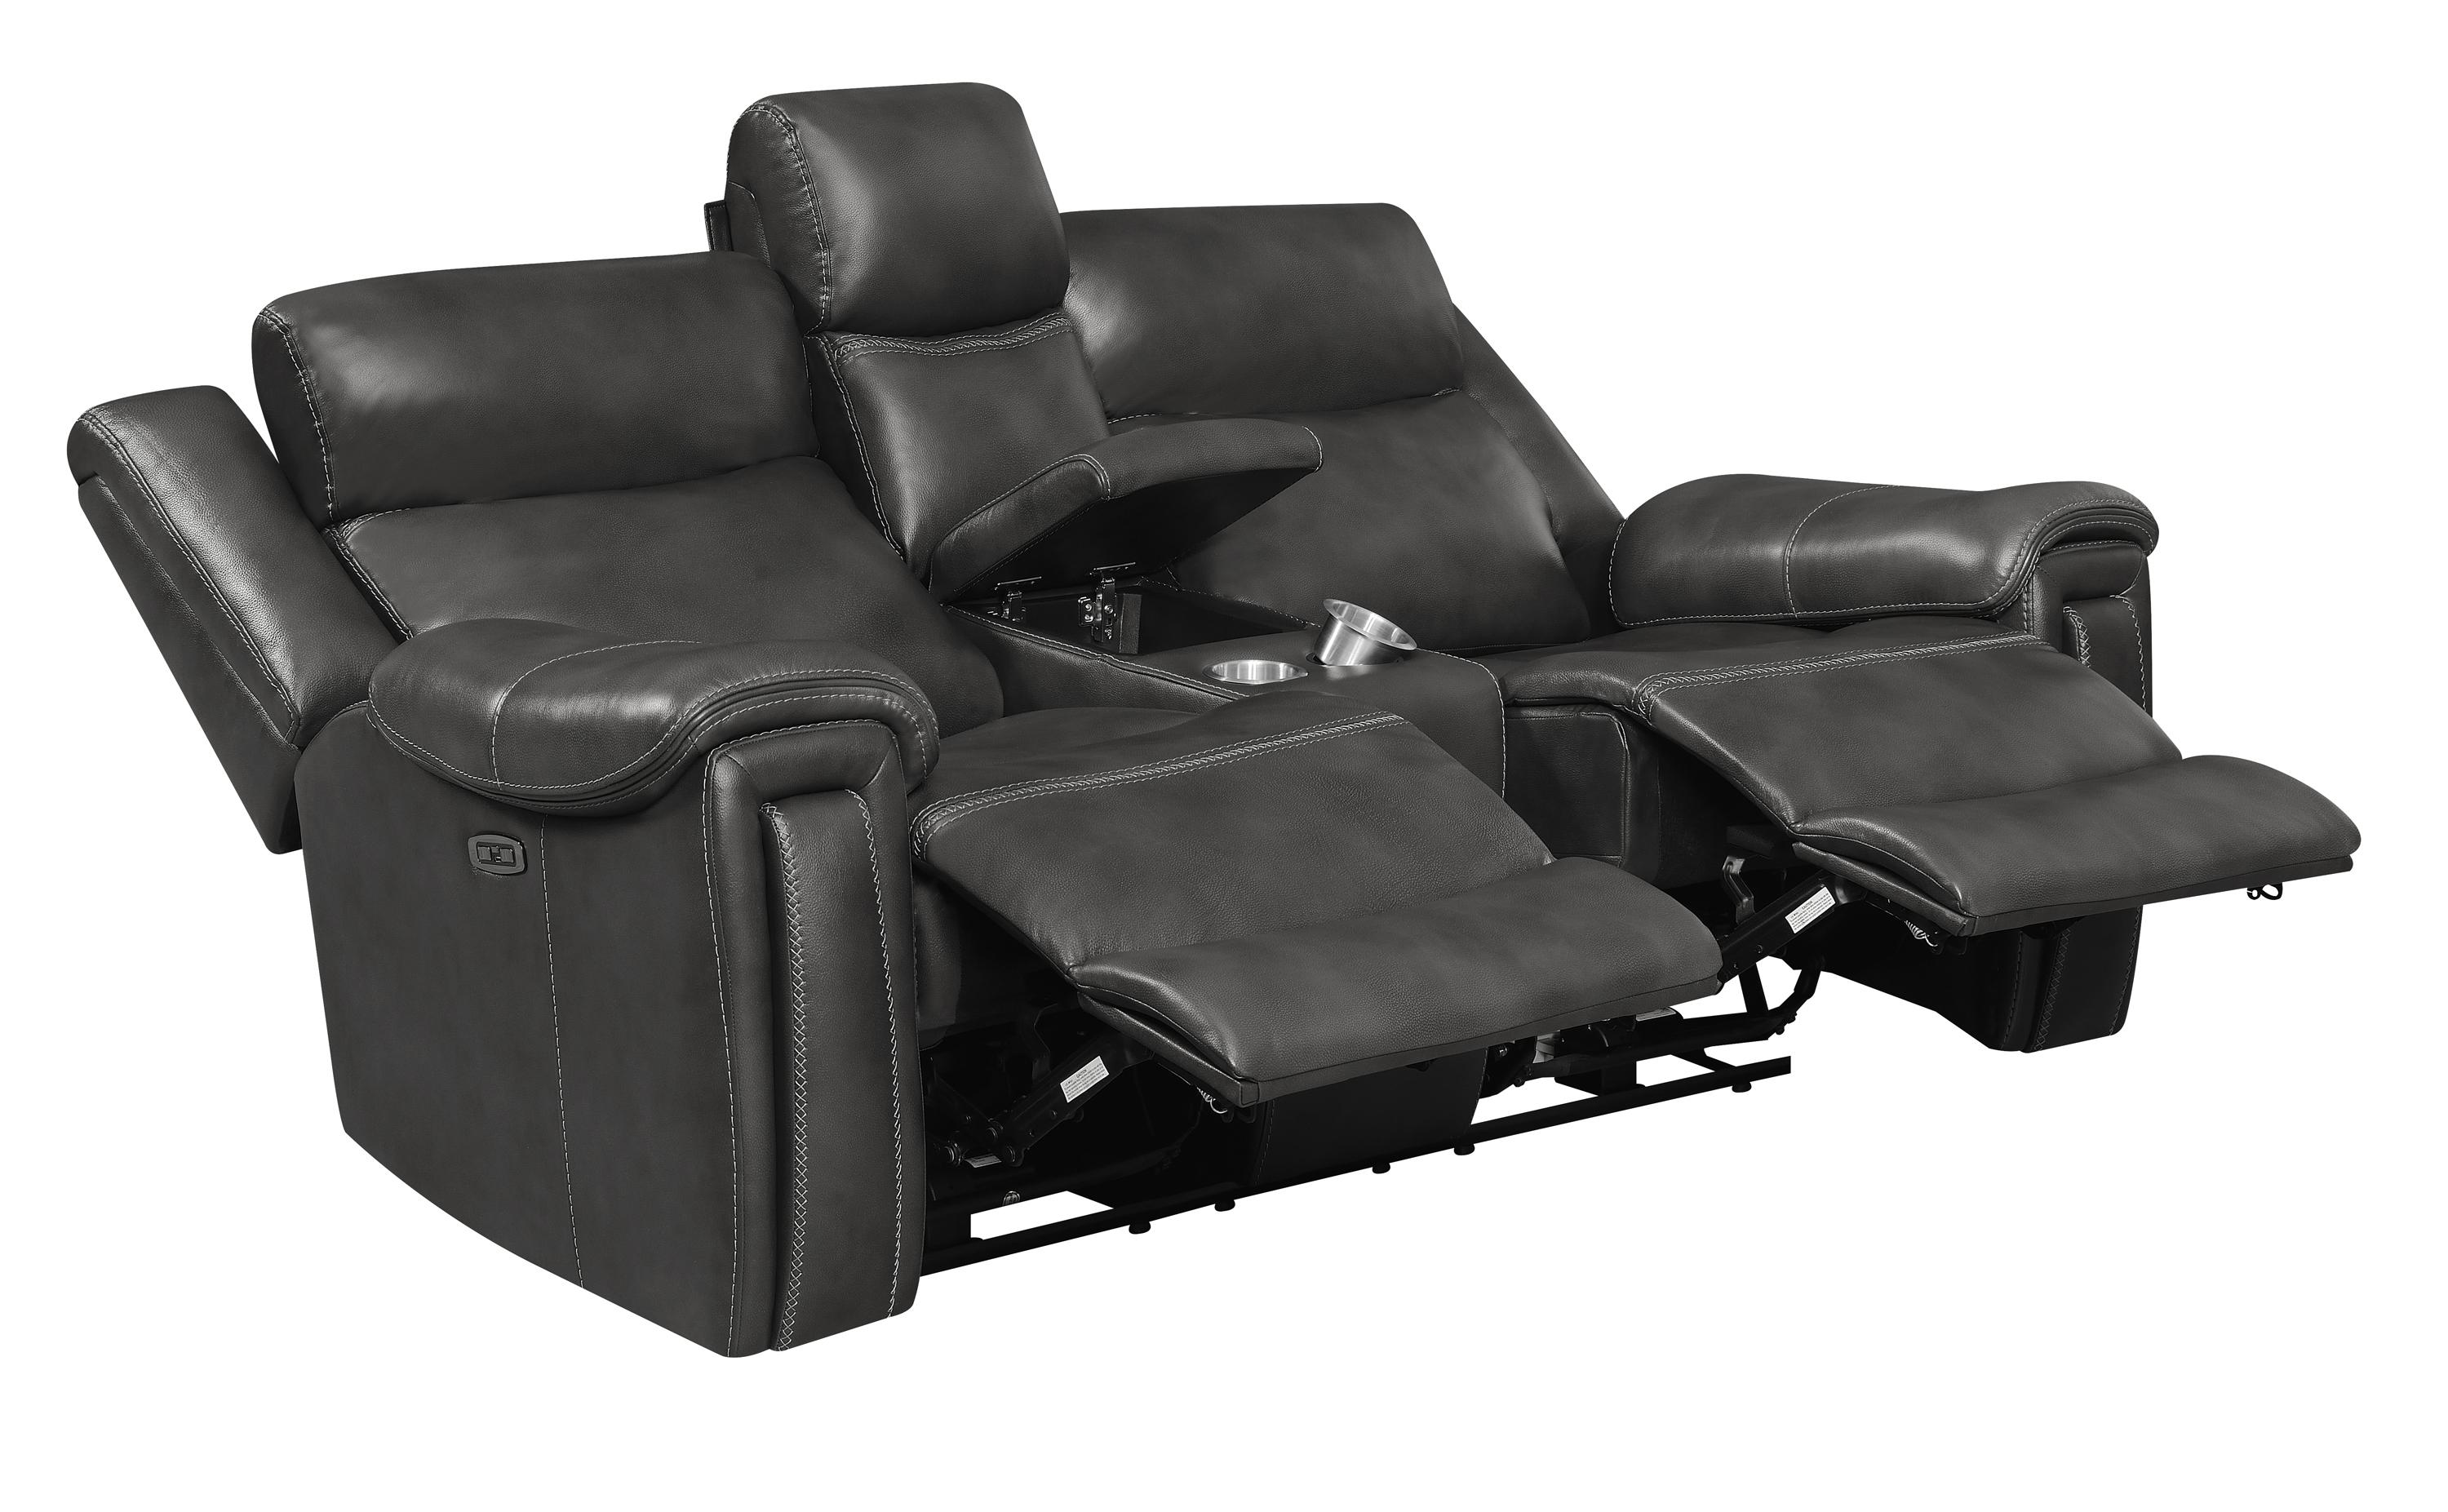 

    
Coaster 609322PP Shallowford Power loveseat Charcoal 609322PP
